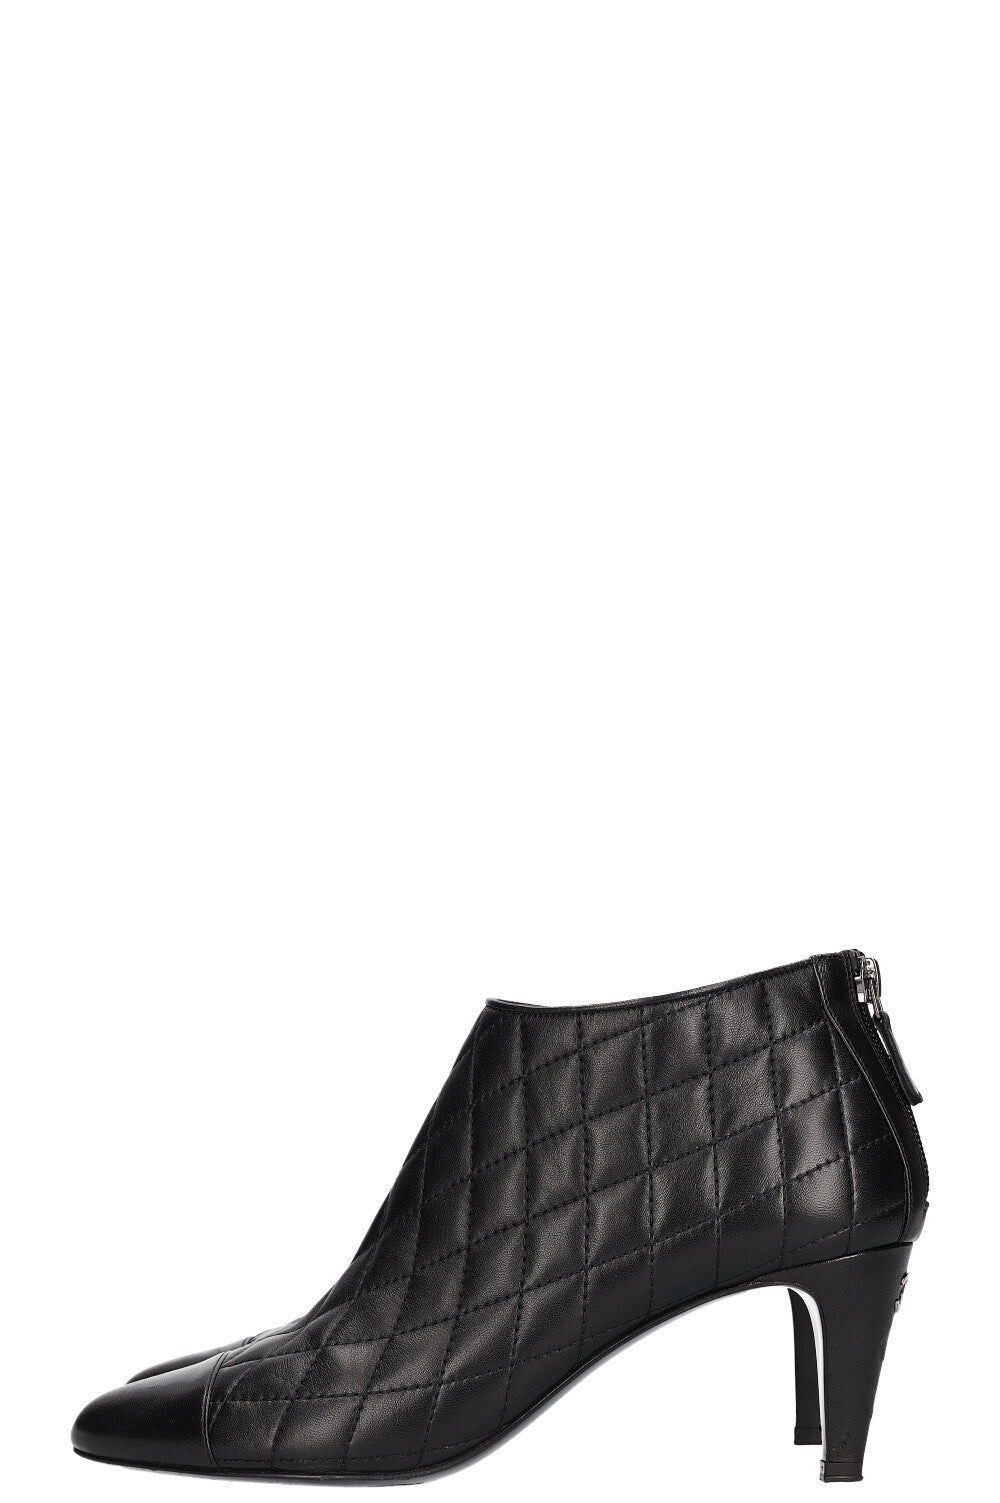 CHANEL Booties Quilted Black